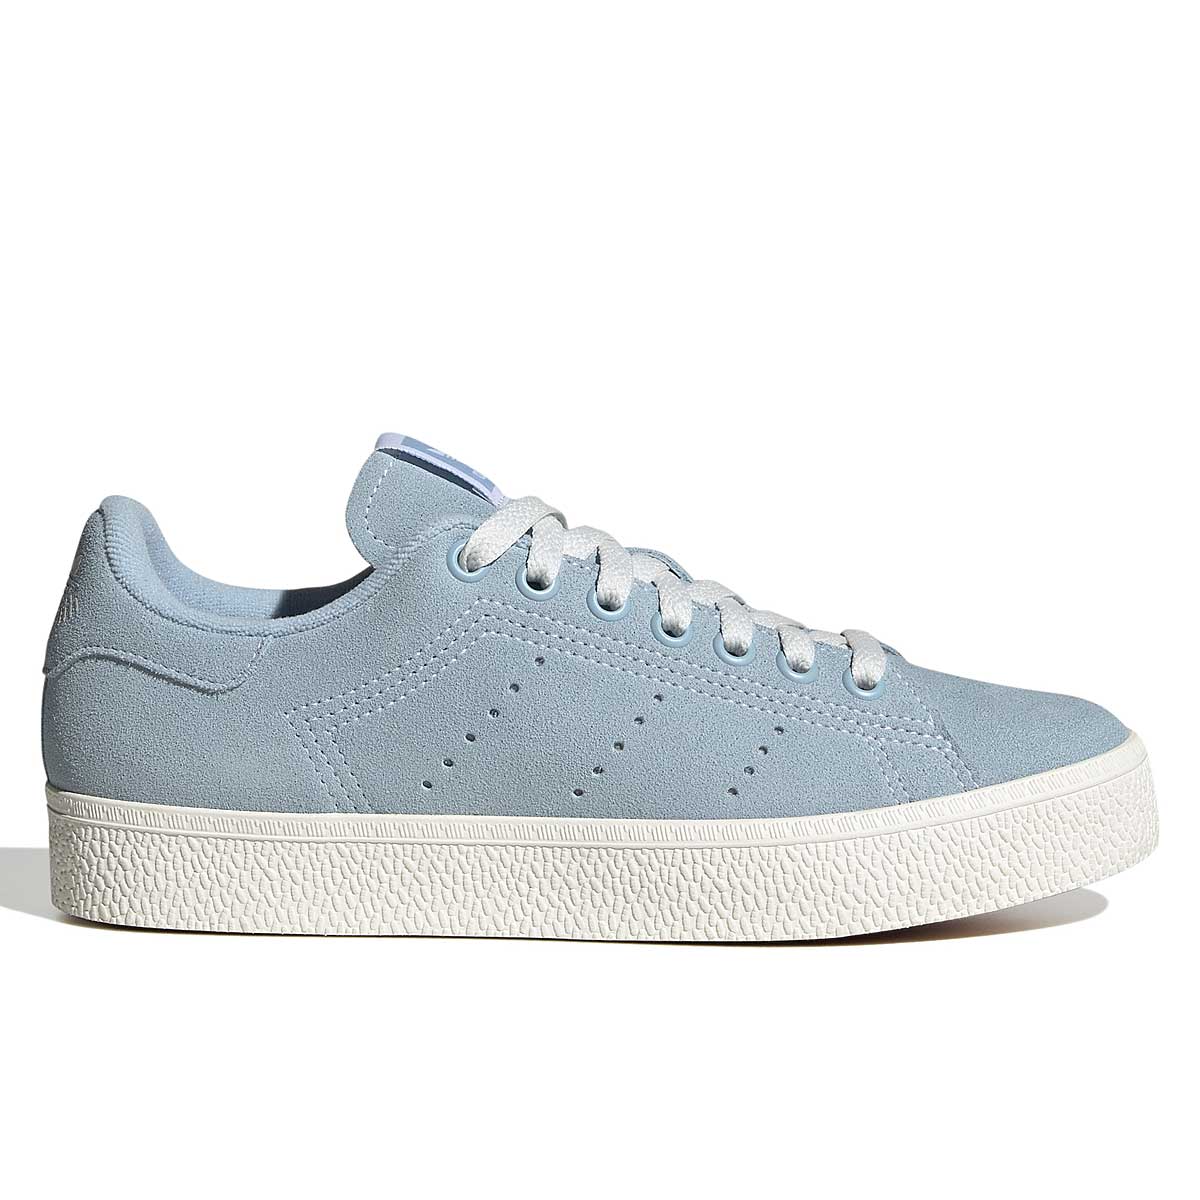 Image of Adidas Stan Smith B-side W, Clesky/ftwwht/cwhite